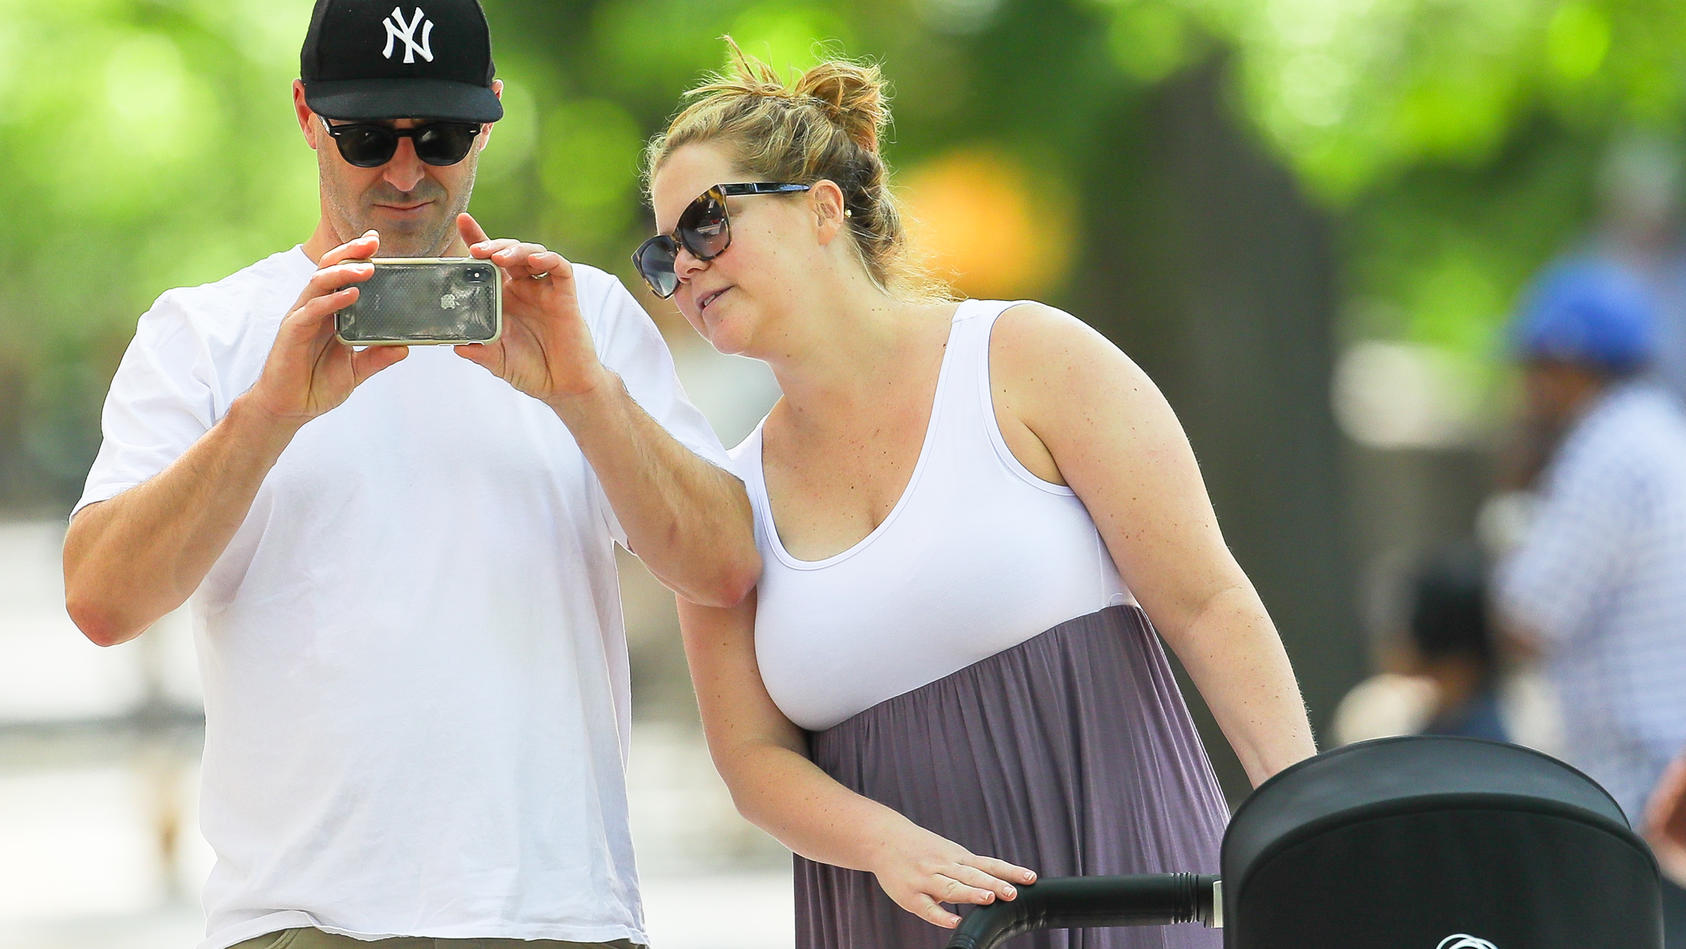 Amy Schumer and Chris Fischer were spotted showing some PDA while pushing the New Born in a stroller at a park in New York City, the new parents were spotted having fun while taking pics of the photographersPictured: Amy Schumer and Chris FischerRef: